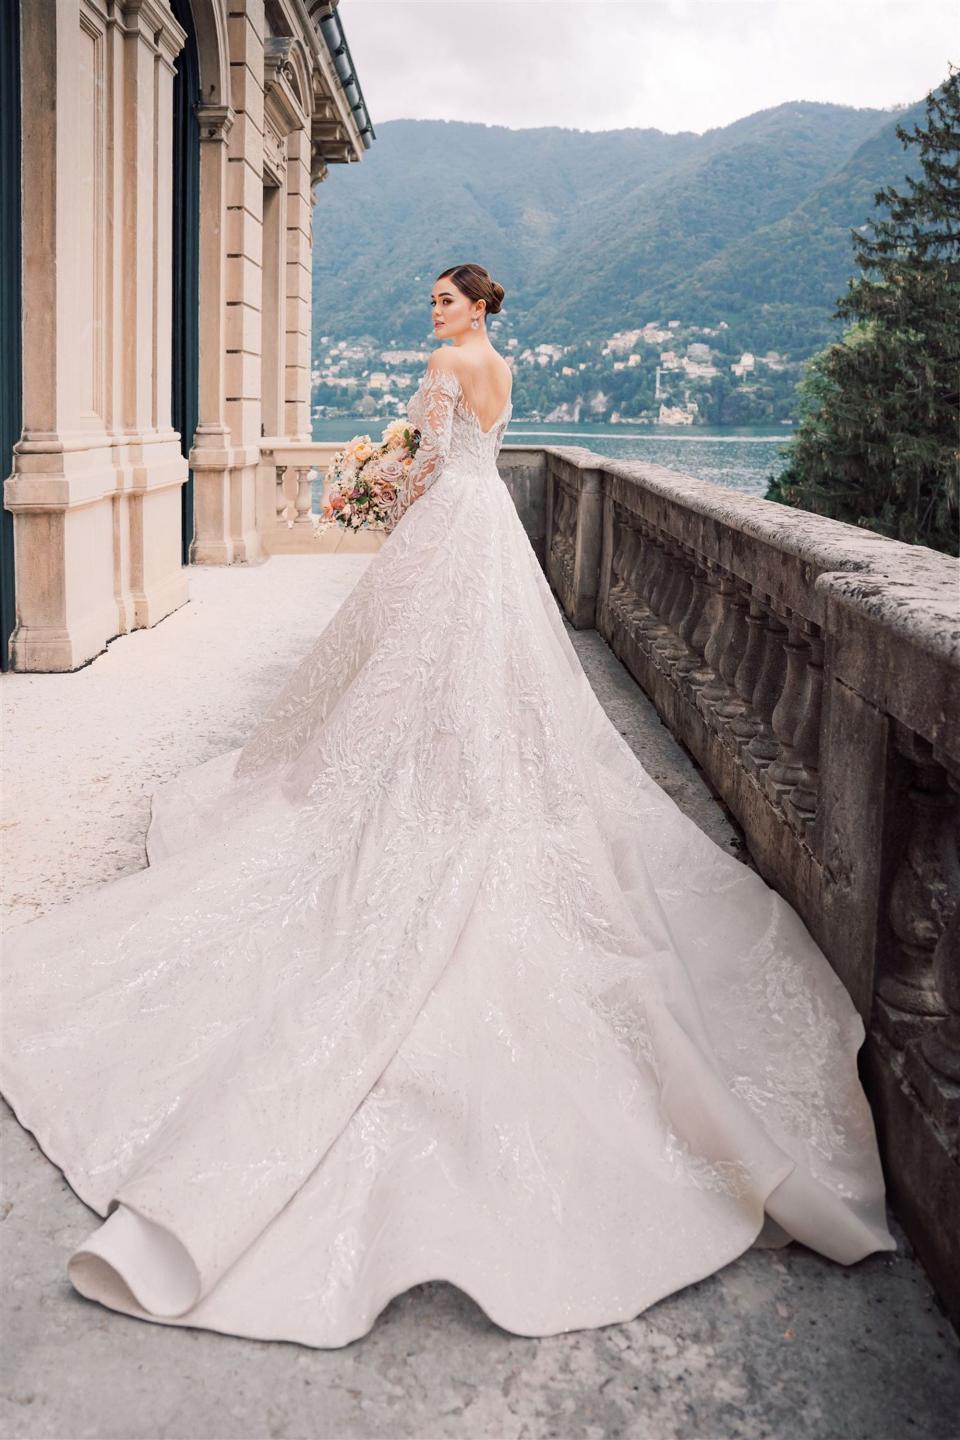 A bride stands on a balcony in her patterned wedding dress.